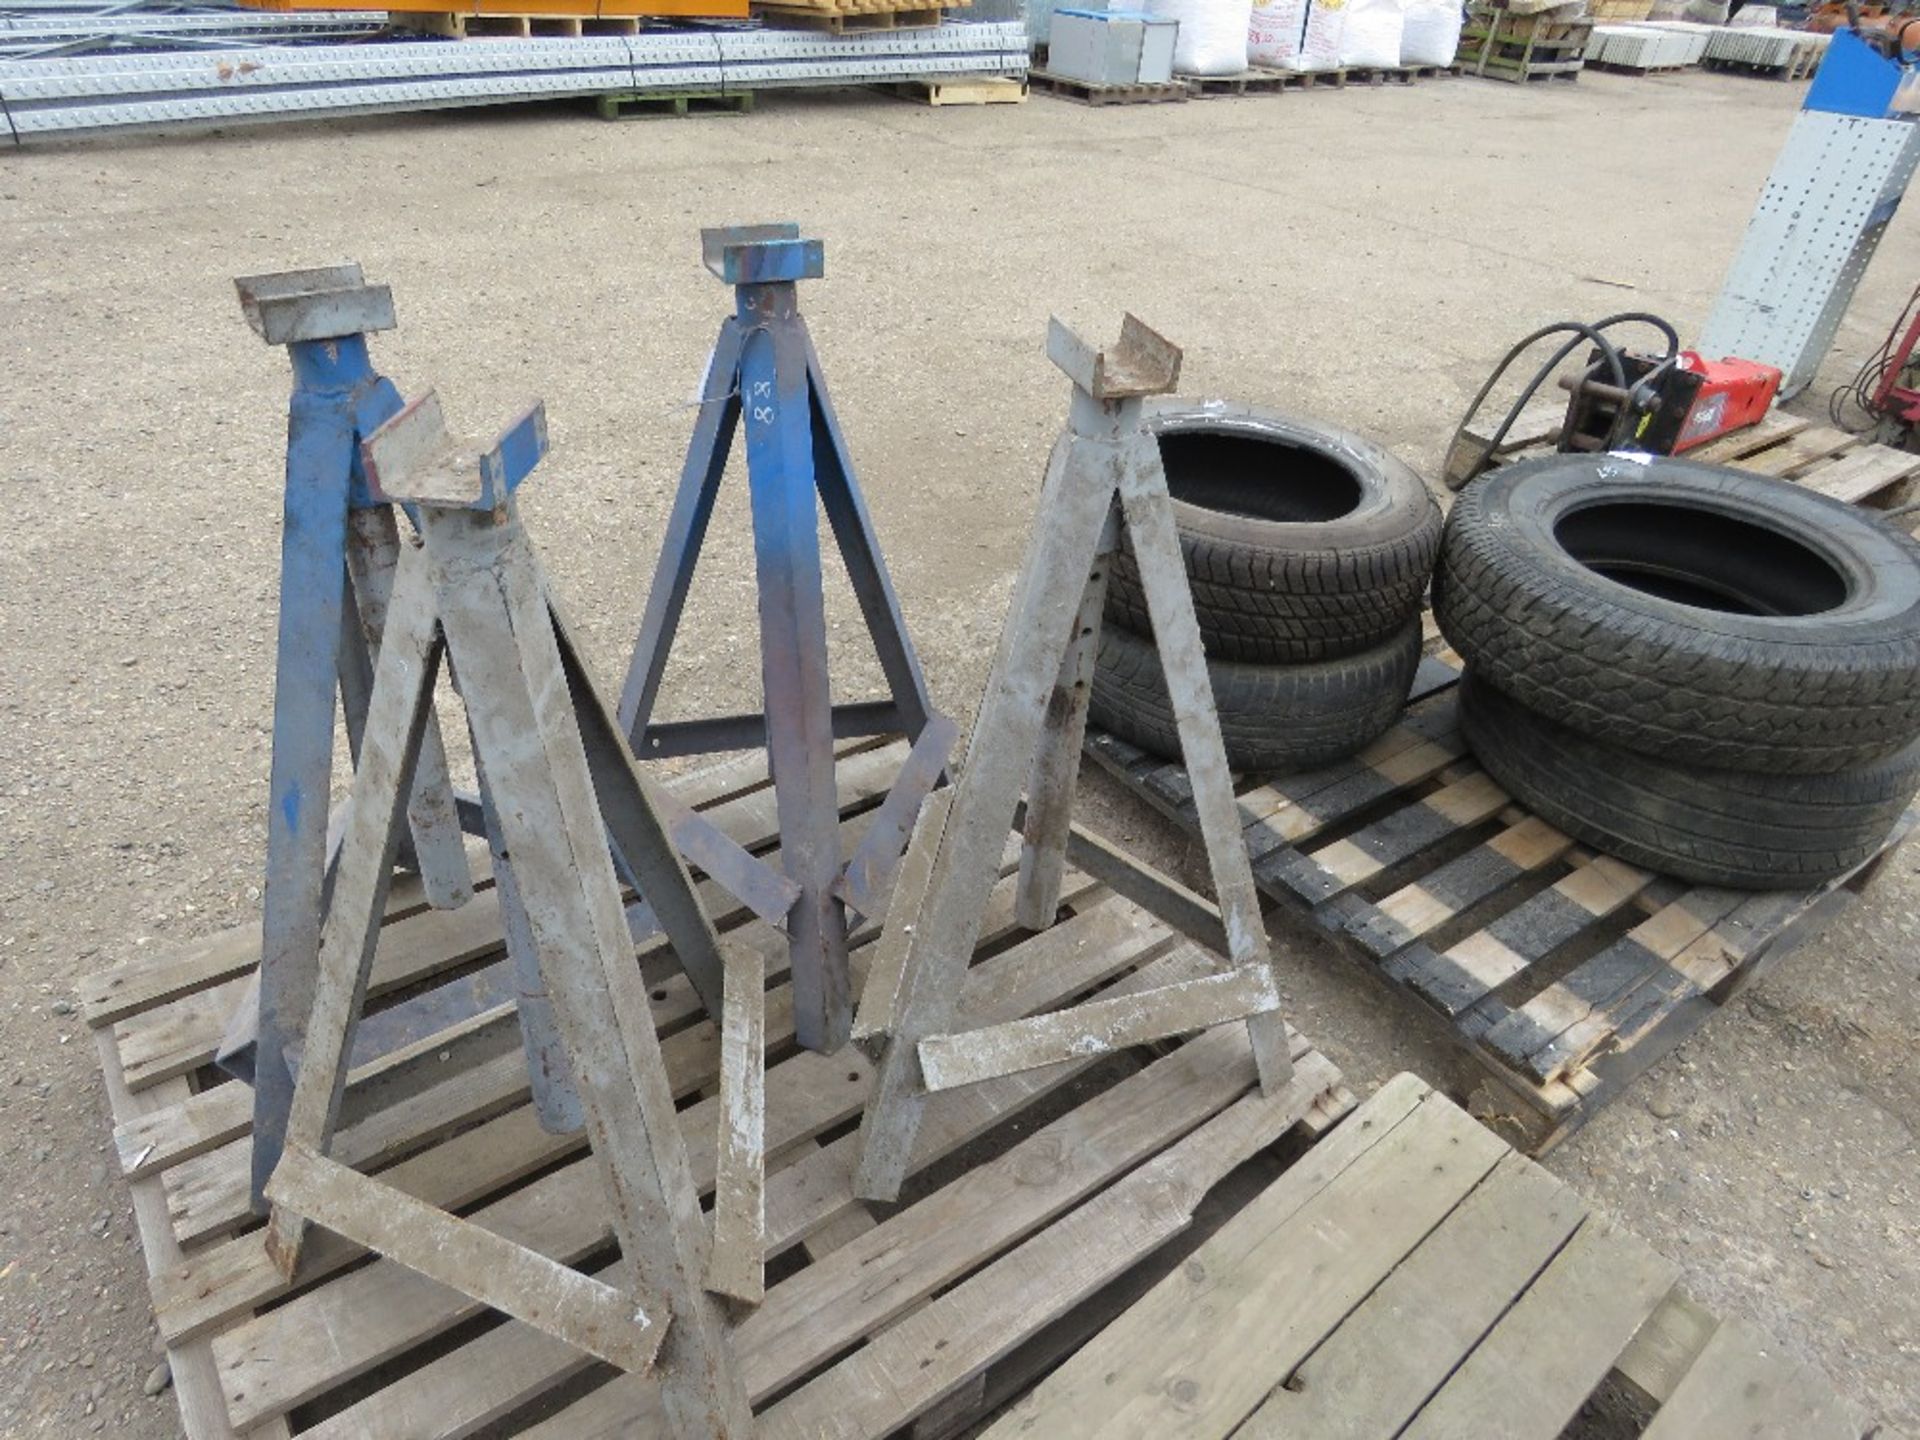 4 X LARGE HEAVY DUTY AXLE STANDS. - Image 2 of 2